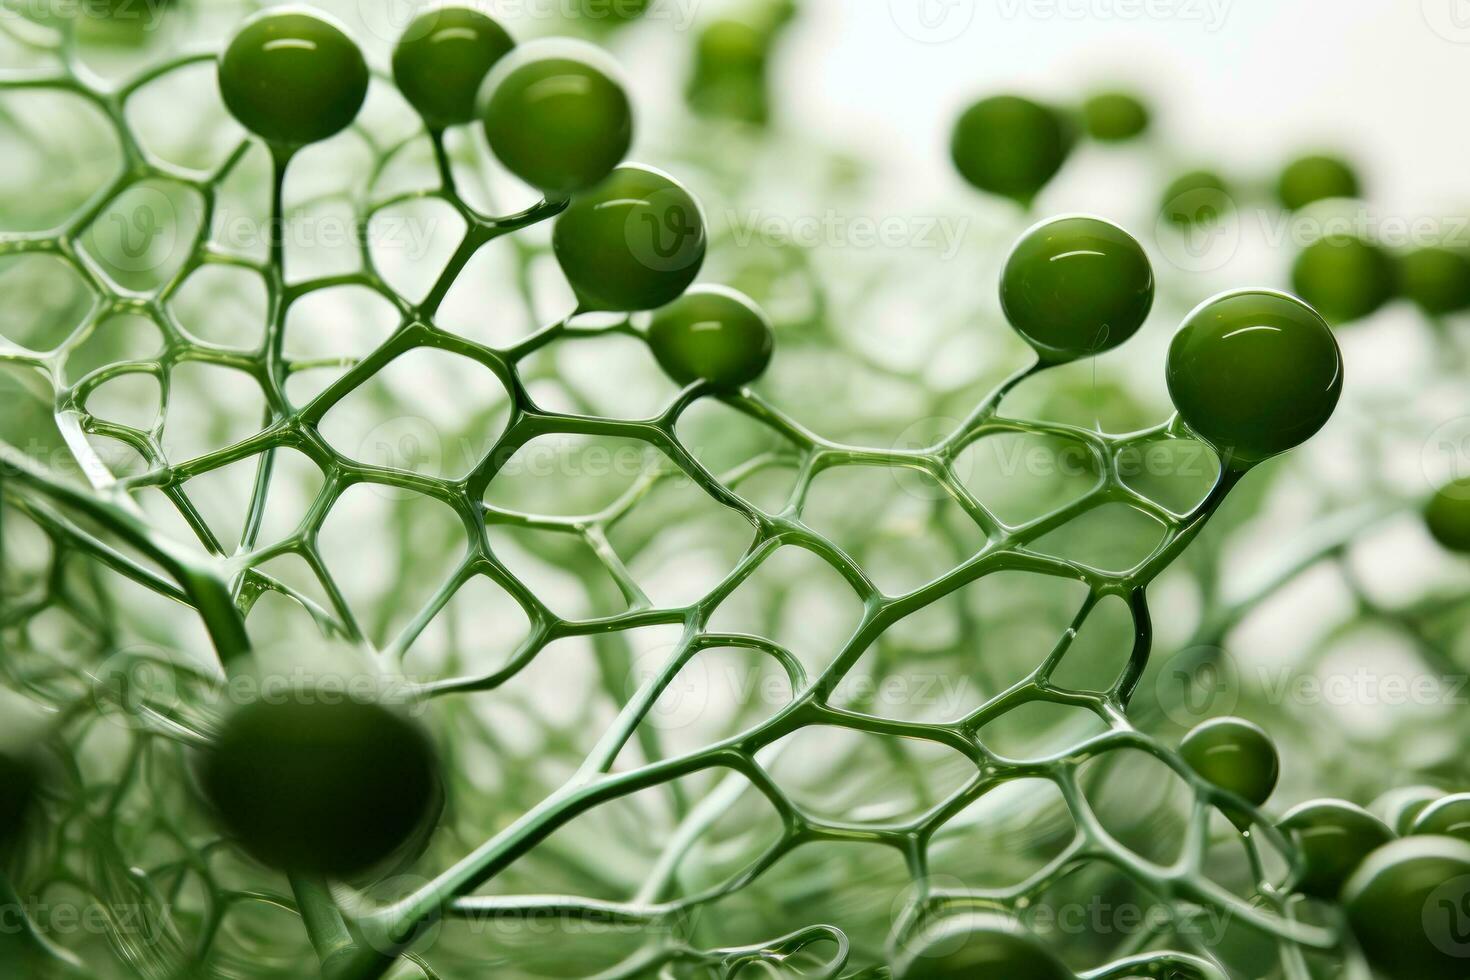 Close up image of cellular plant structures isolated on a white background photo